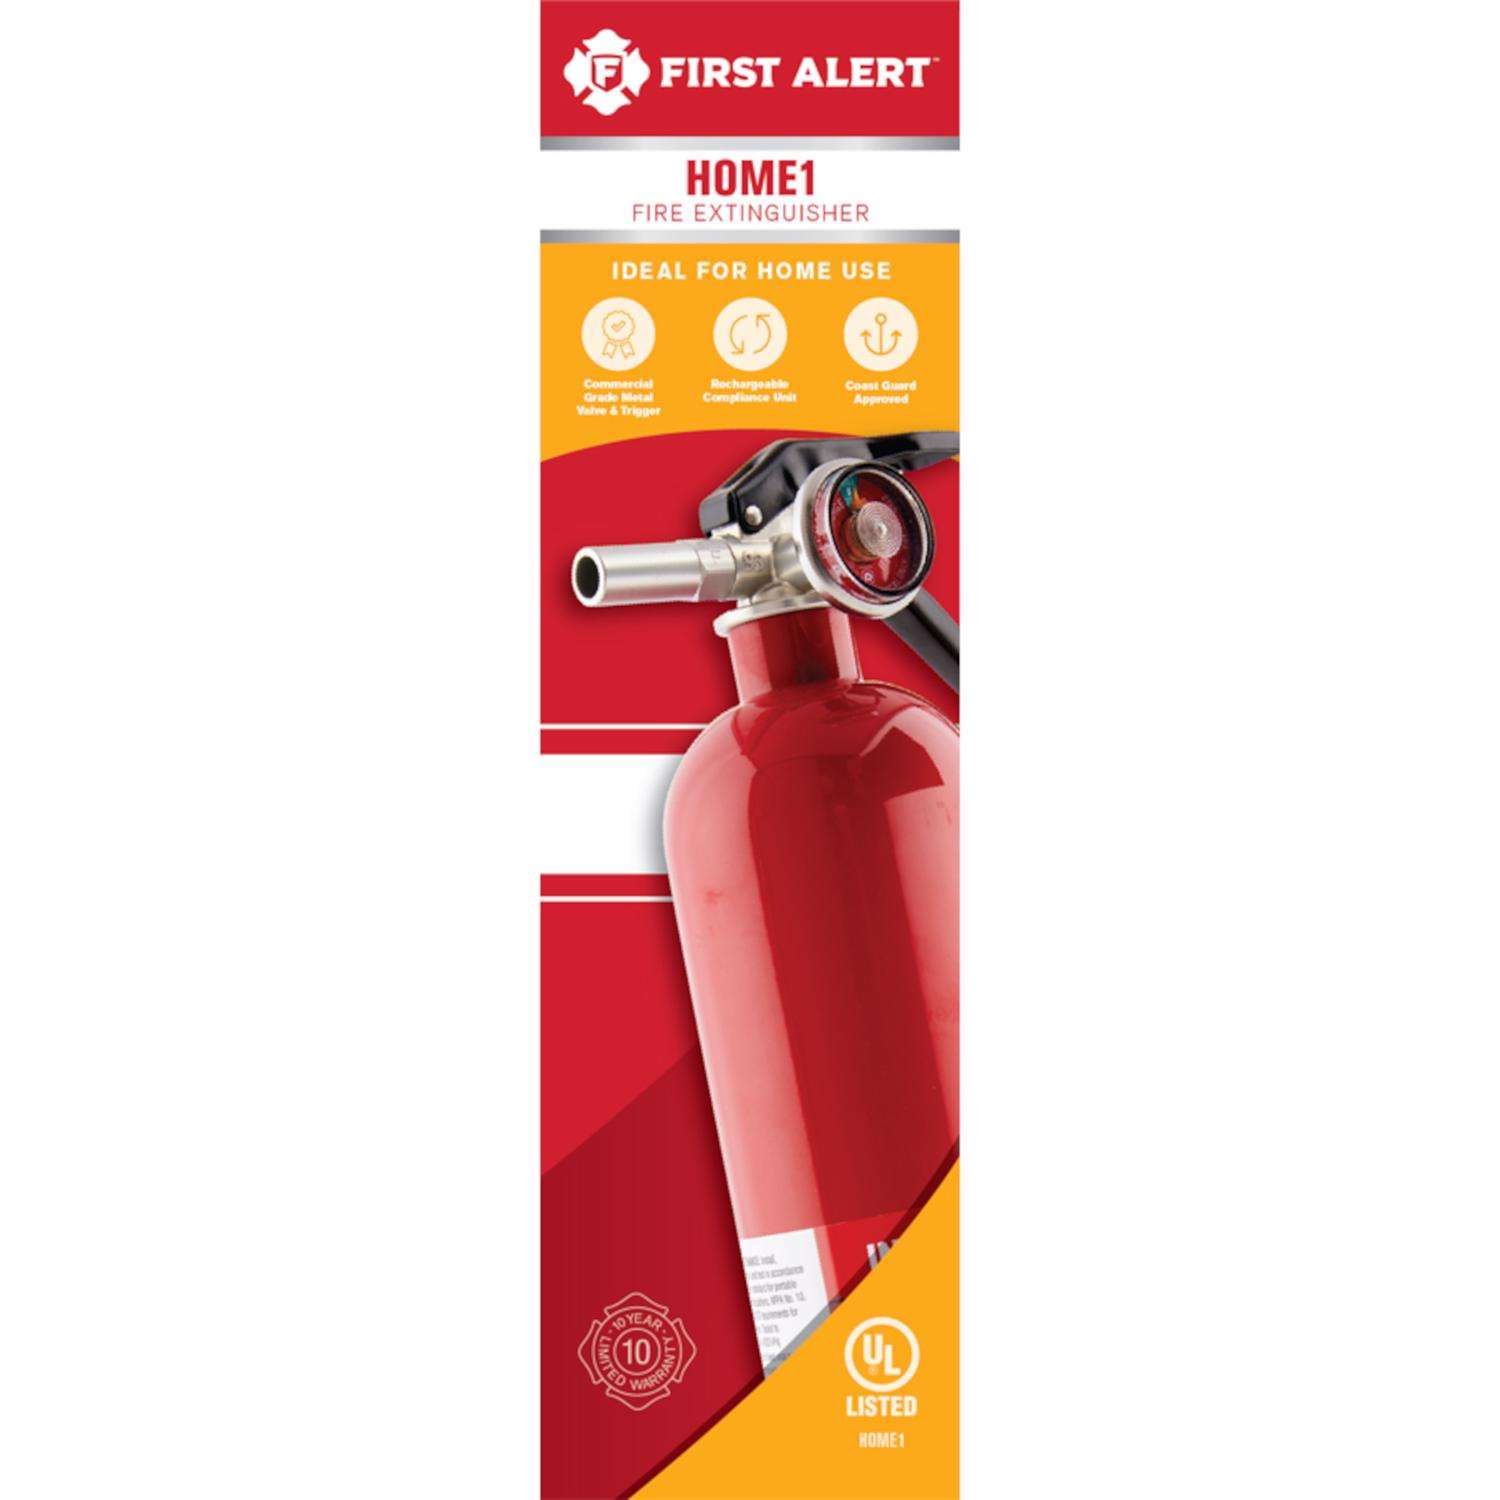 First Alert 2-1/2 lb Fire Extinguisher For Household OSHA/US Coast